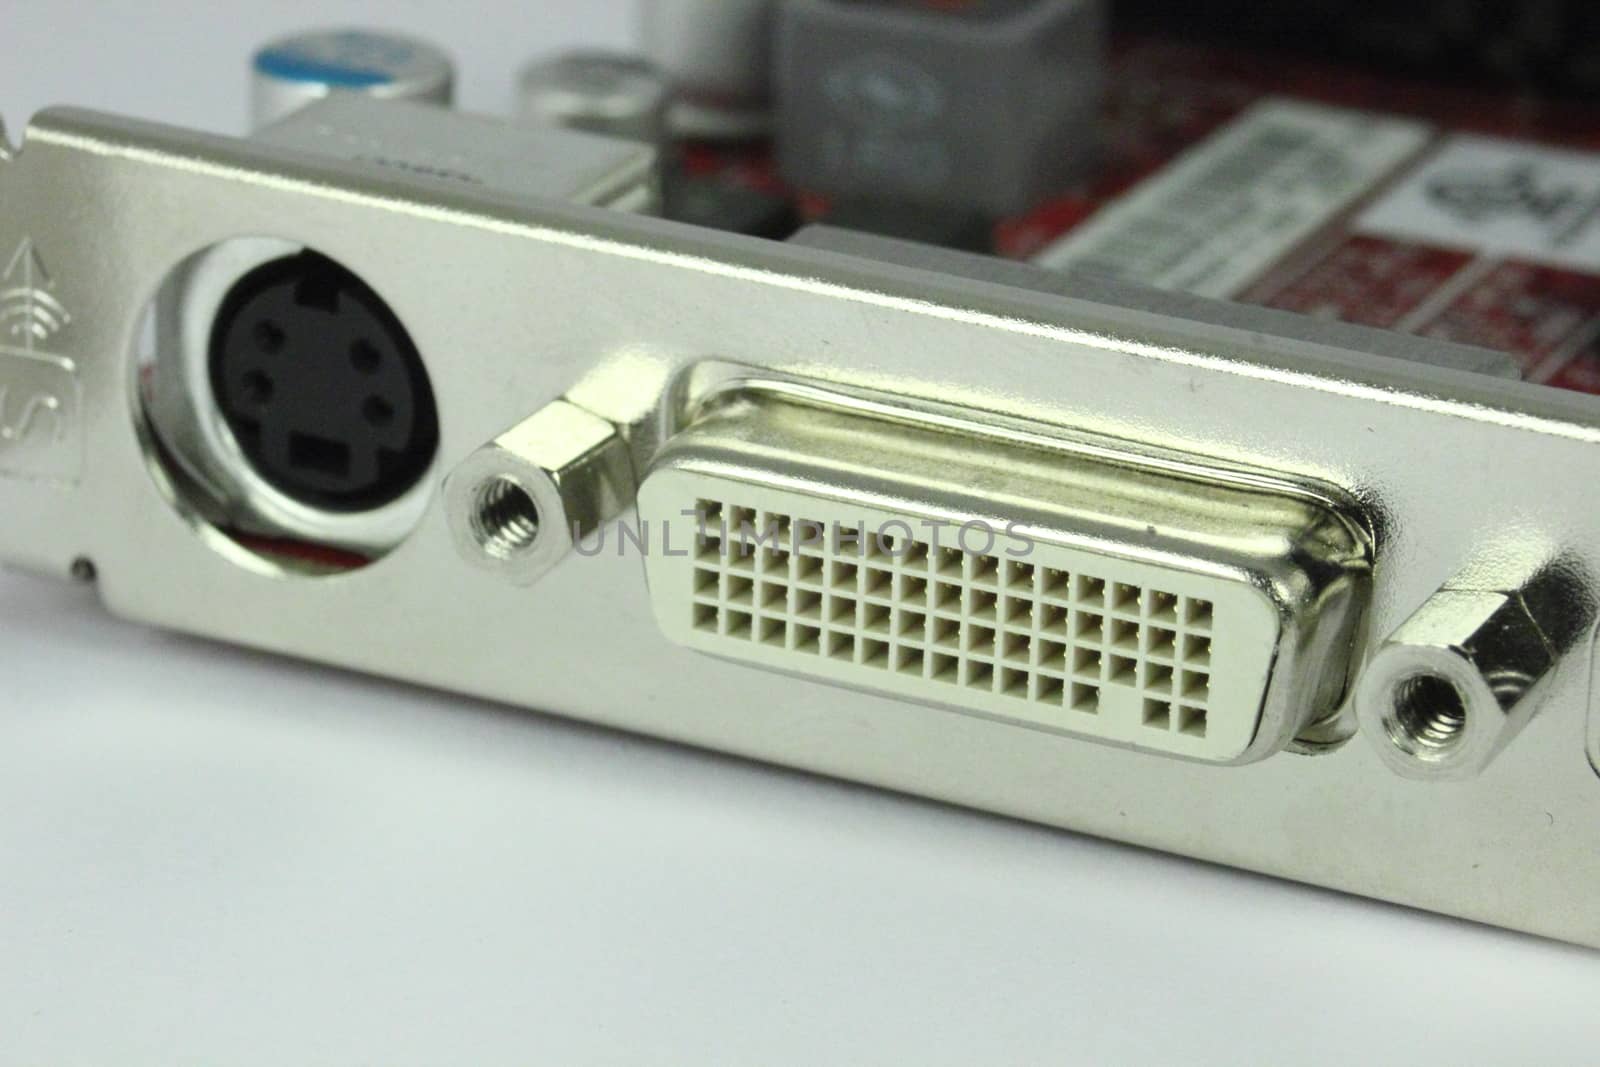 Connector on computer graphics card to digital video